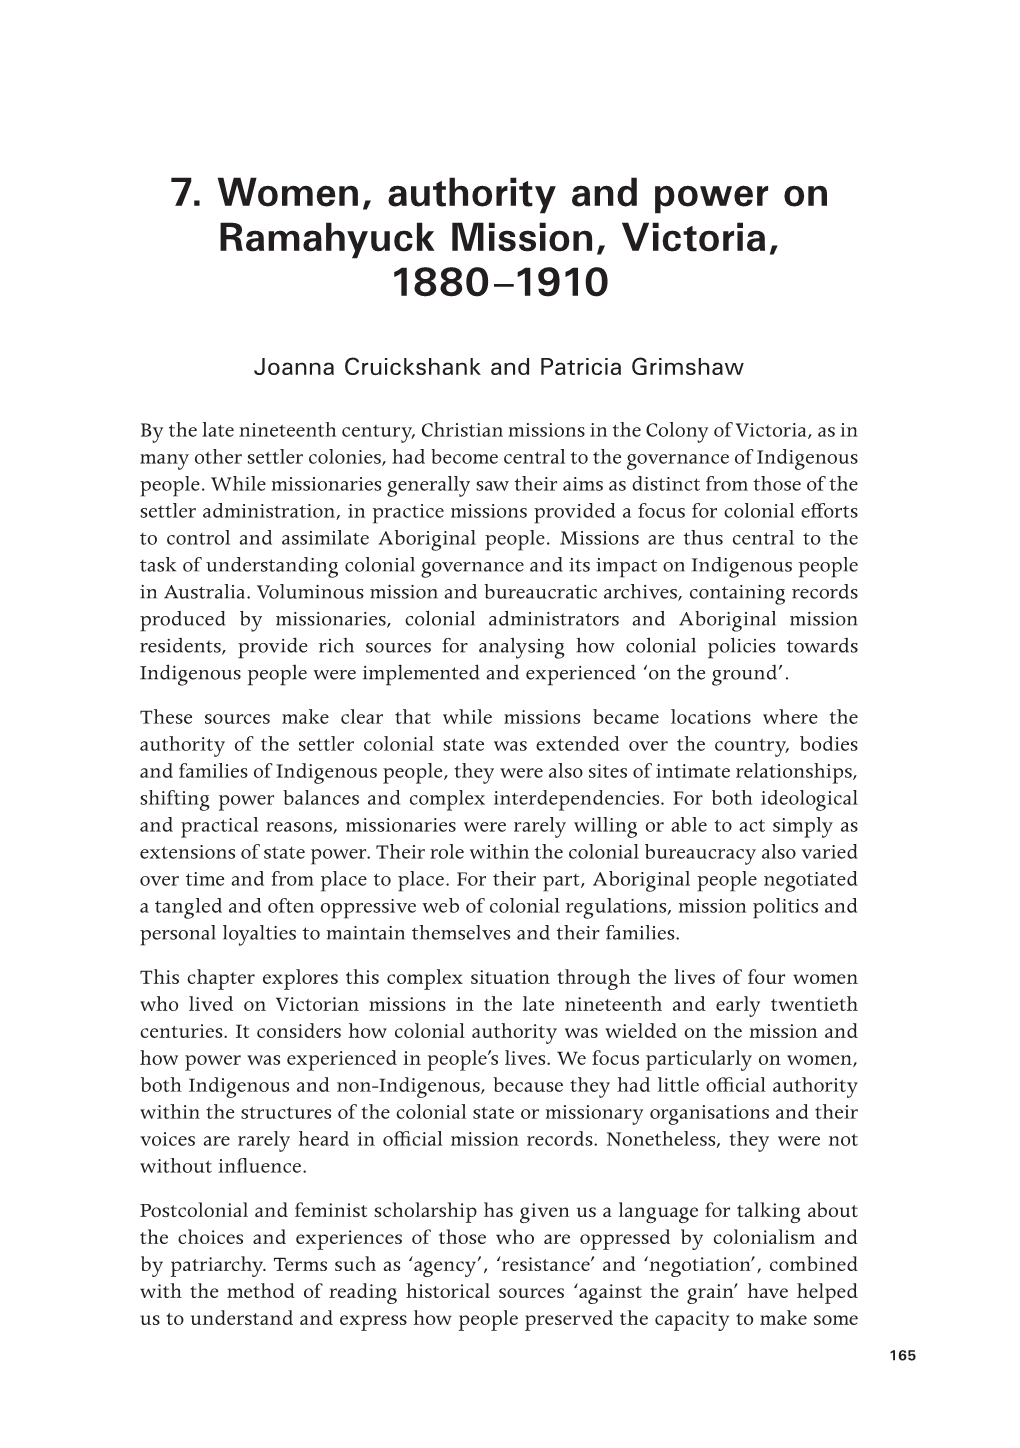 7. Women, Authority and Power on Ramahyuck Mission, Victoria, 1880–1910